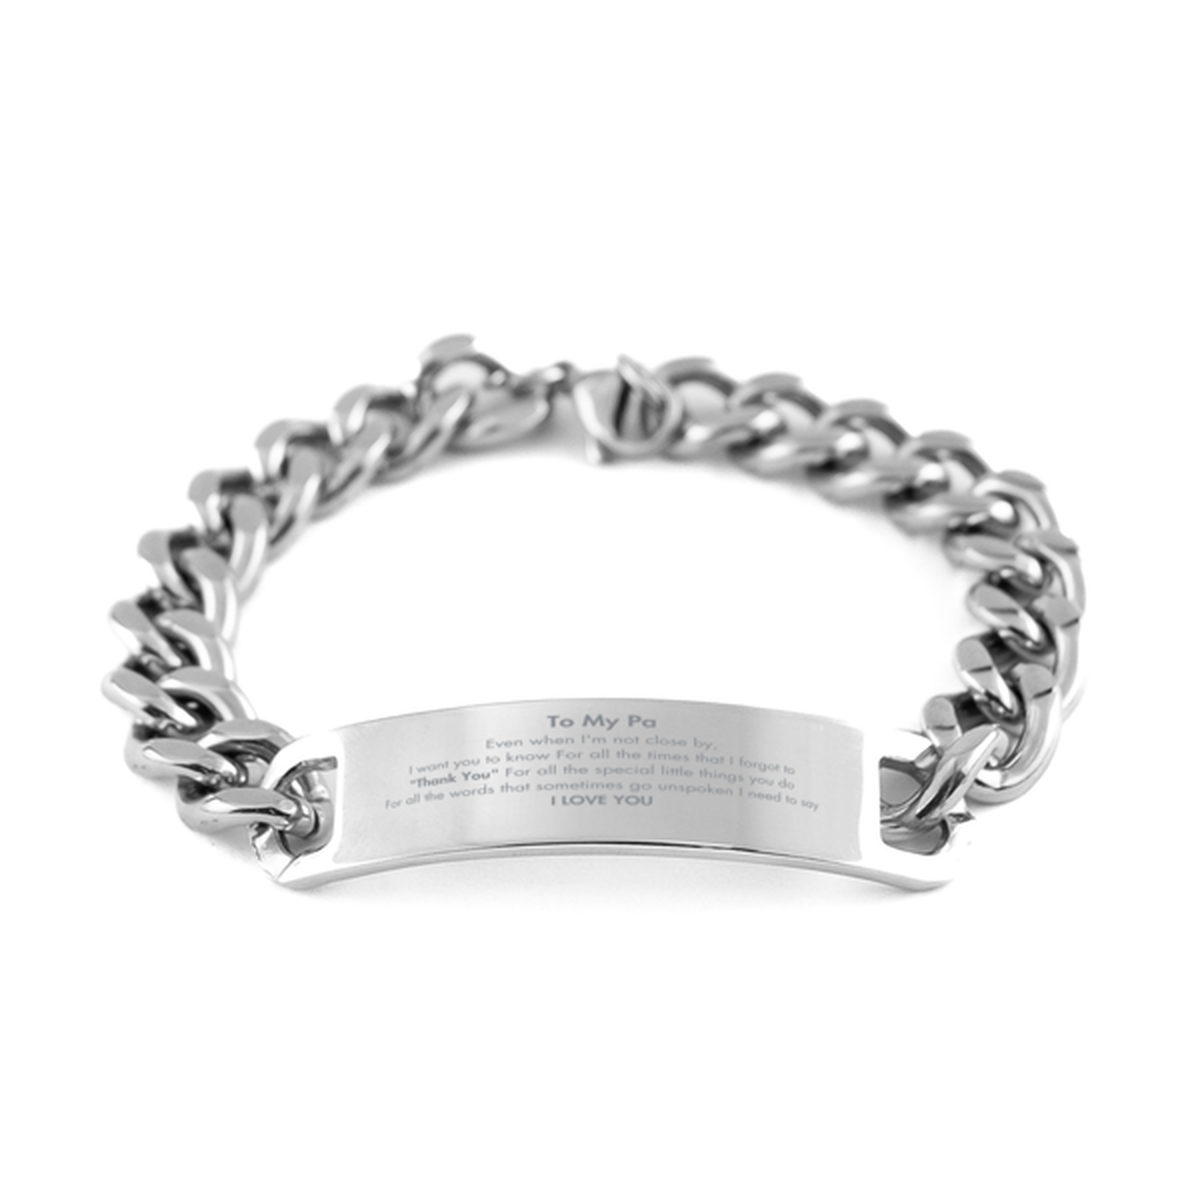 Thank You Gifts for Pa, Keepsake Cuban Chain Stainless Steel Bracelet Gifts for Pa Birthday Mother's day Father's Day Pa For all the words That sometimes go unspoken I need to say I LOVE YOU